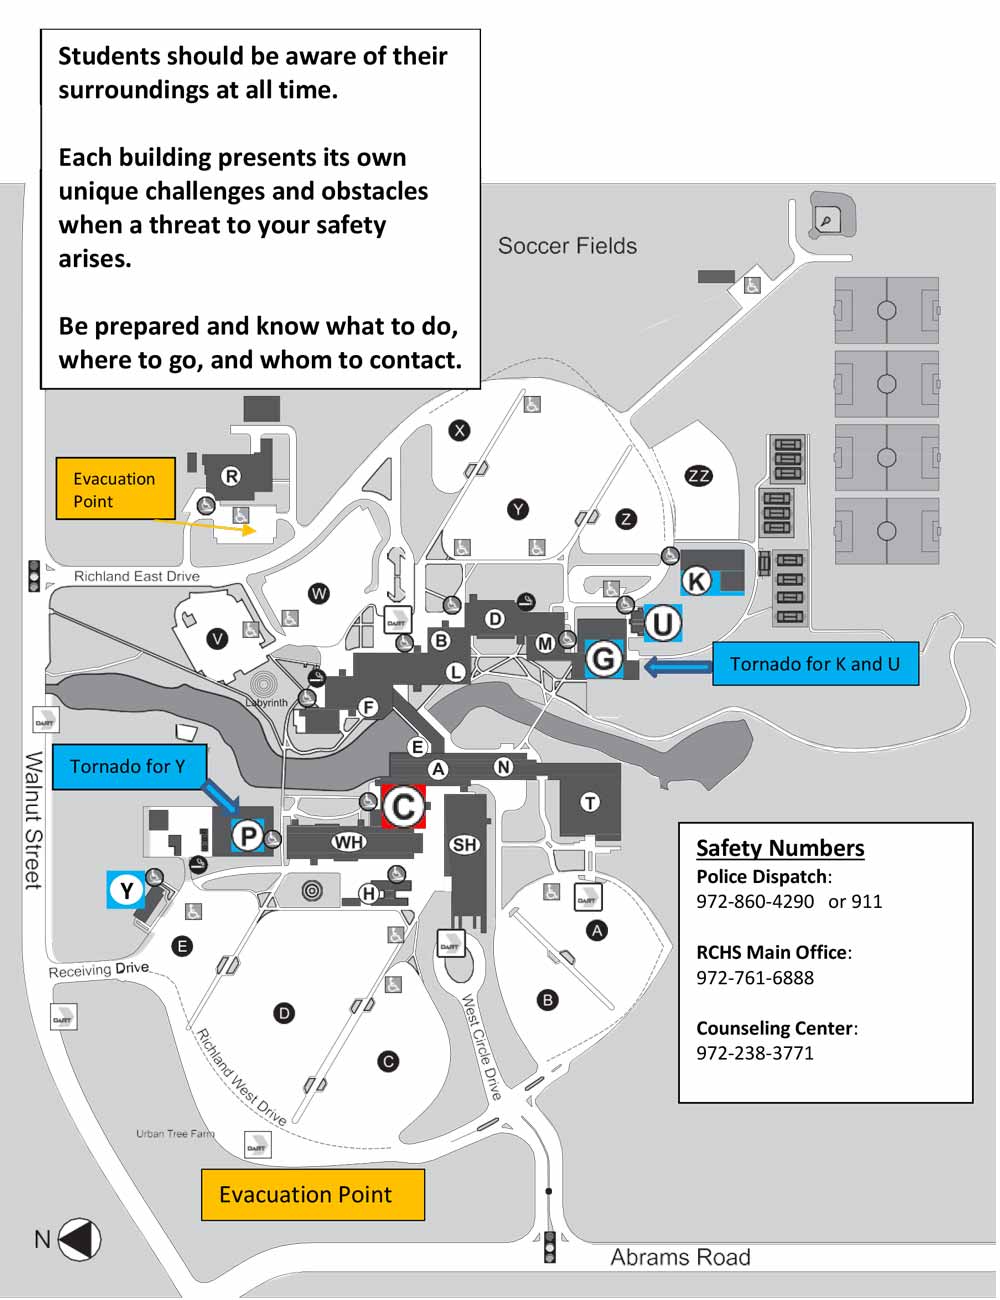 RCHS Safety and Evacuation Information Map